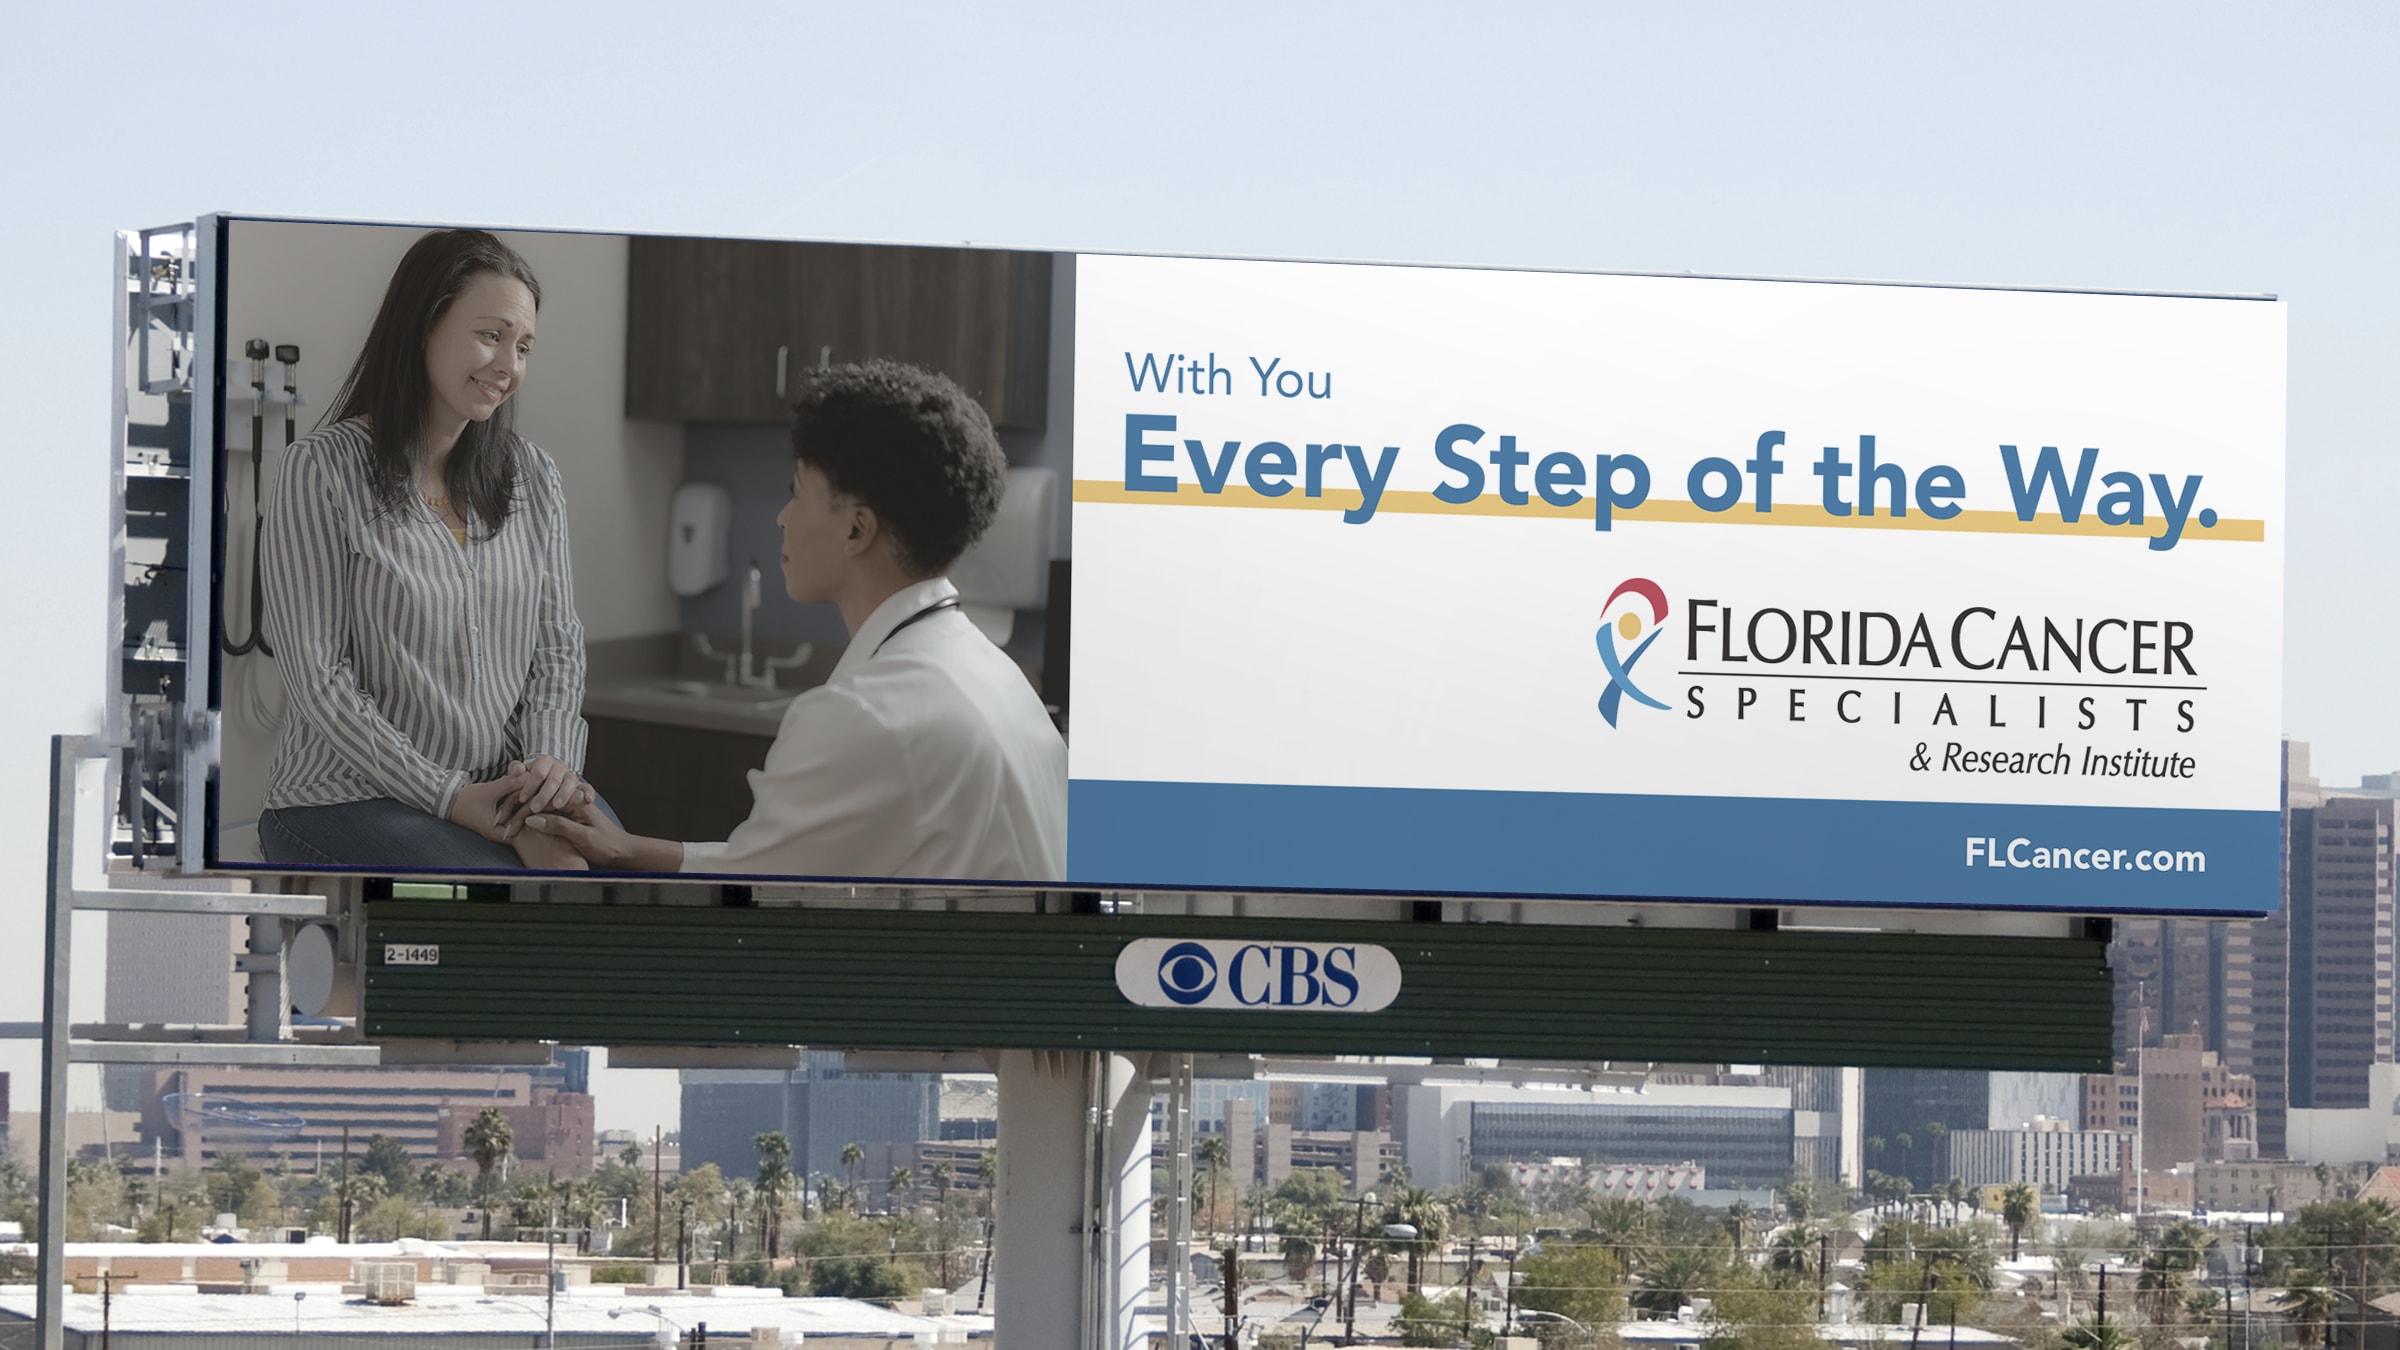 Every Step of the Way Billboard for Florida Cancer Specialists